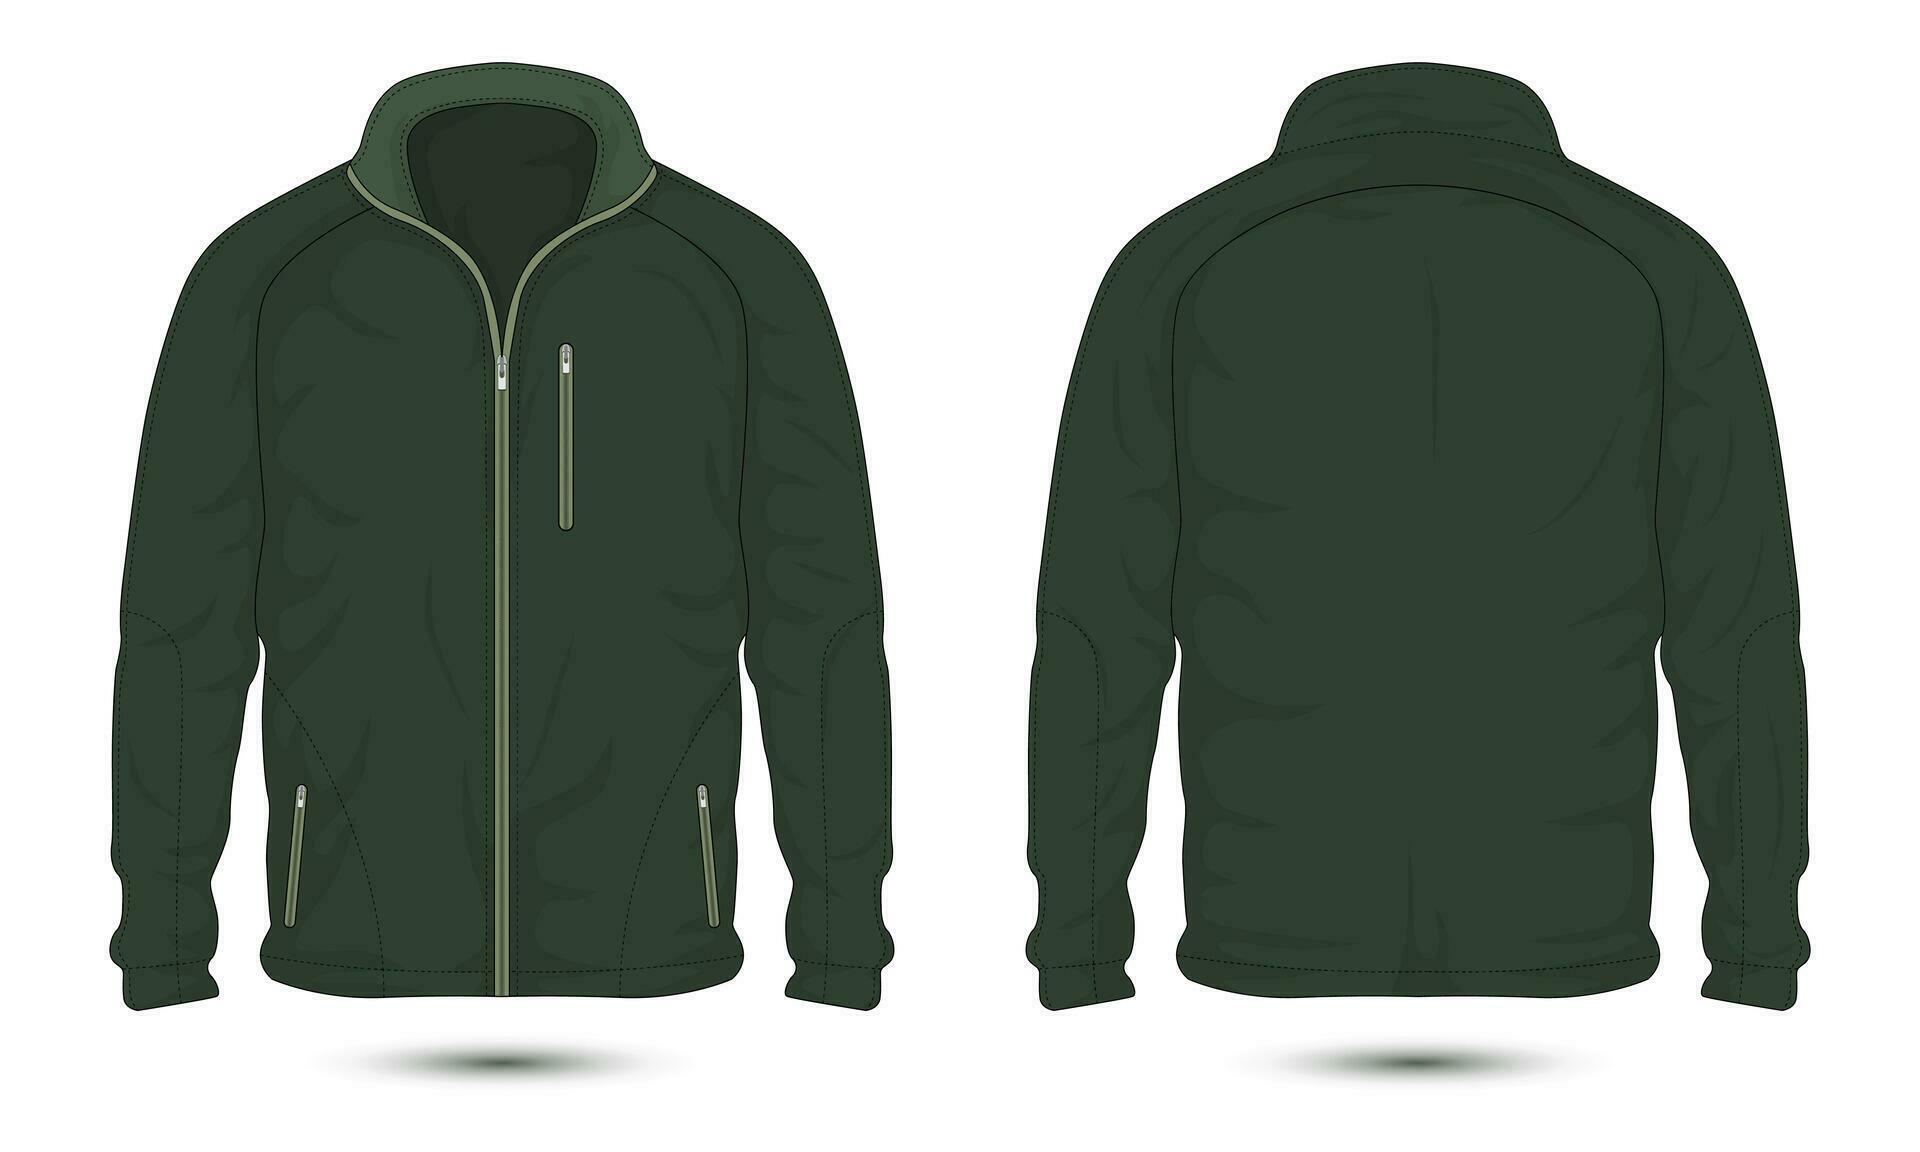 Army green zipper casual jacket mockup front and back view 26650152 ...